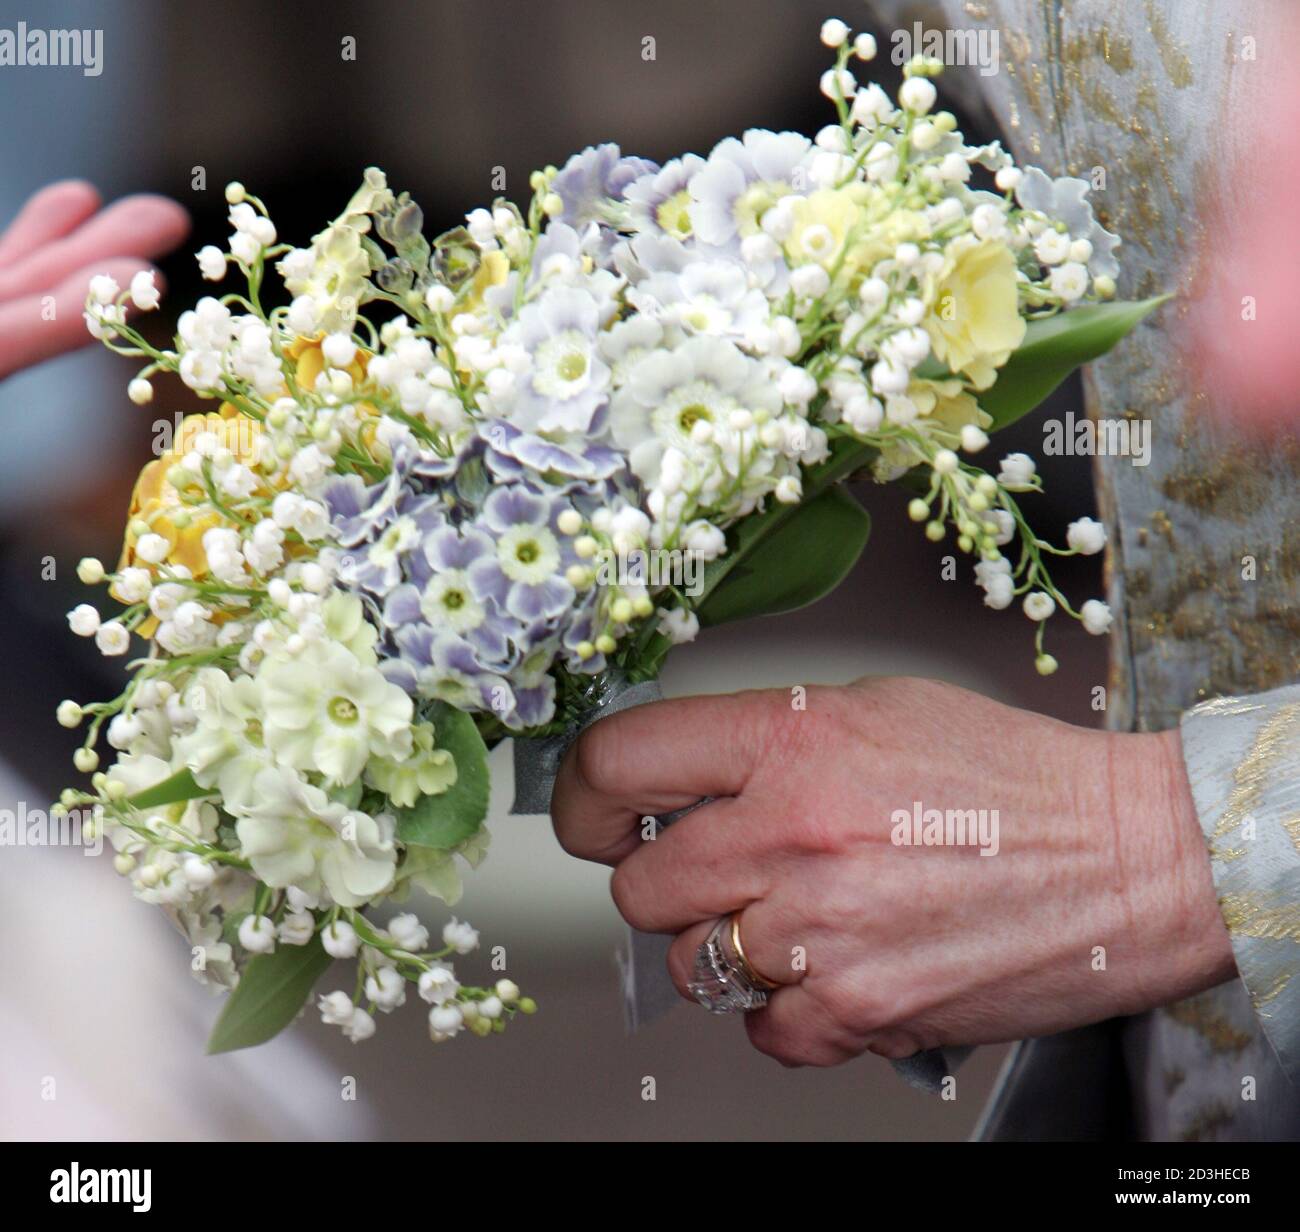 Duchess Of Cornwall Wearing Wedding Ring Holds Bouquet After Marriage To Britain S Prince Charles In Windsor The Duchess Of Cornwall Wearing Her New Wedding Ring Holds A Bouquet Of Flowers After Leaving